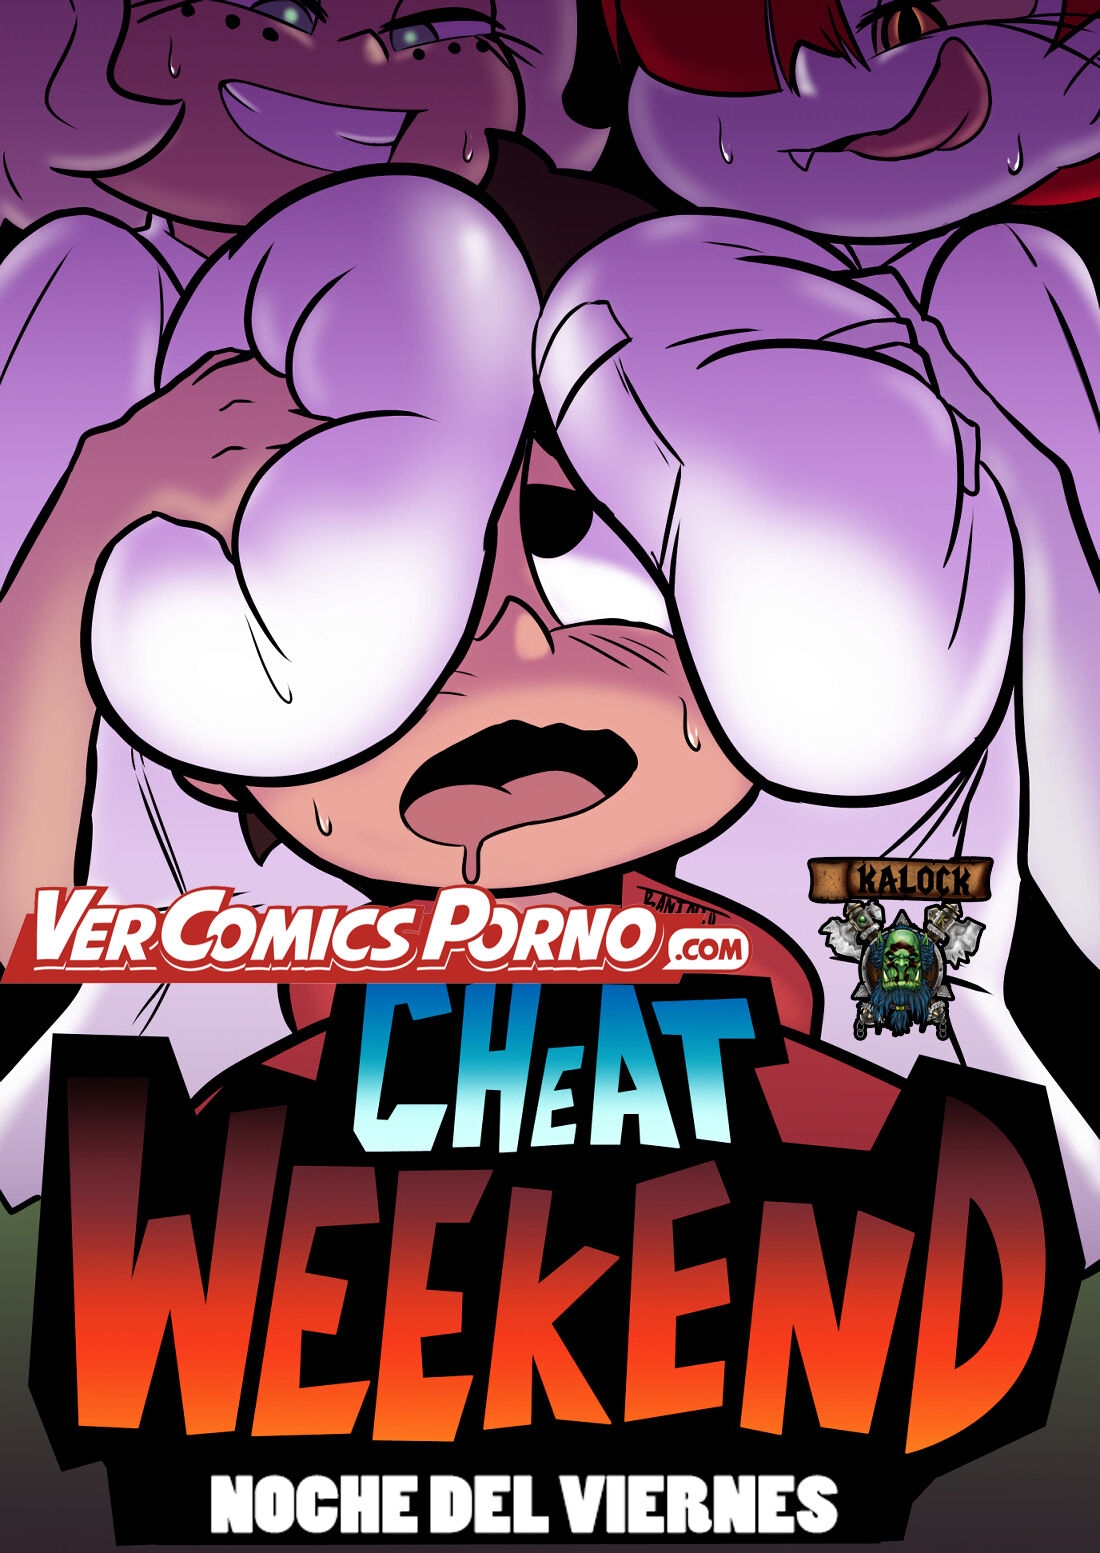 [Banjabu] Cheat Weekend：Noche Del Viernes (Color) (Star vs. The Forces of Evil) (Spanish) [kalock & VCP] 0